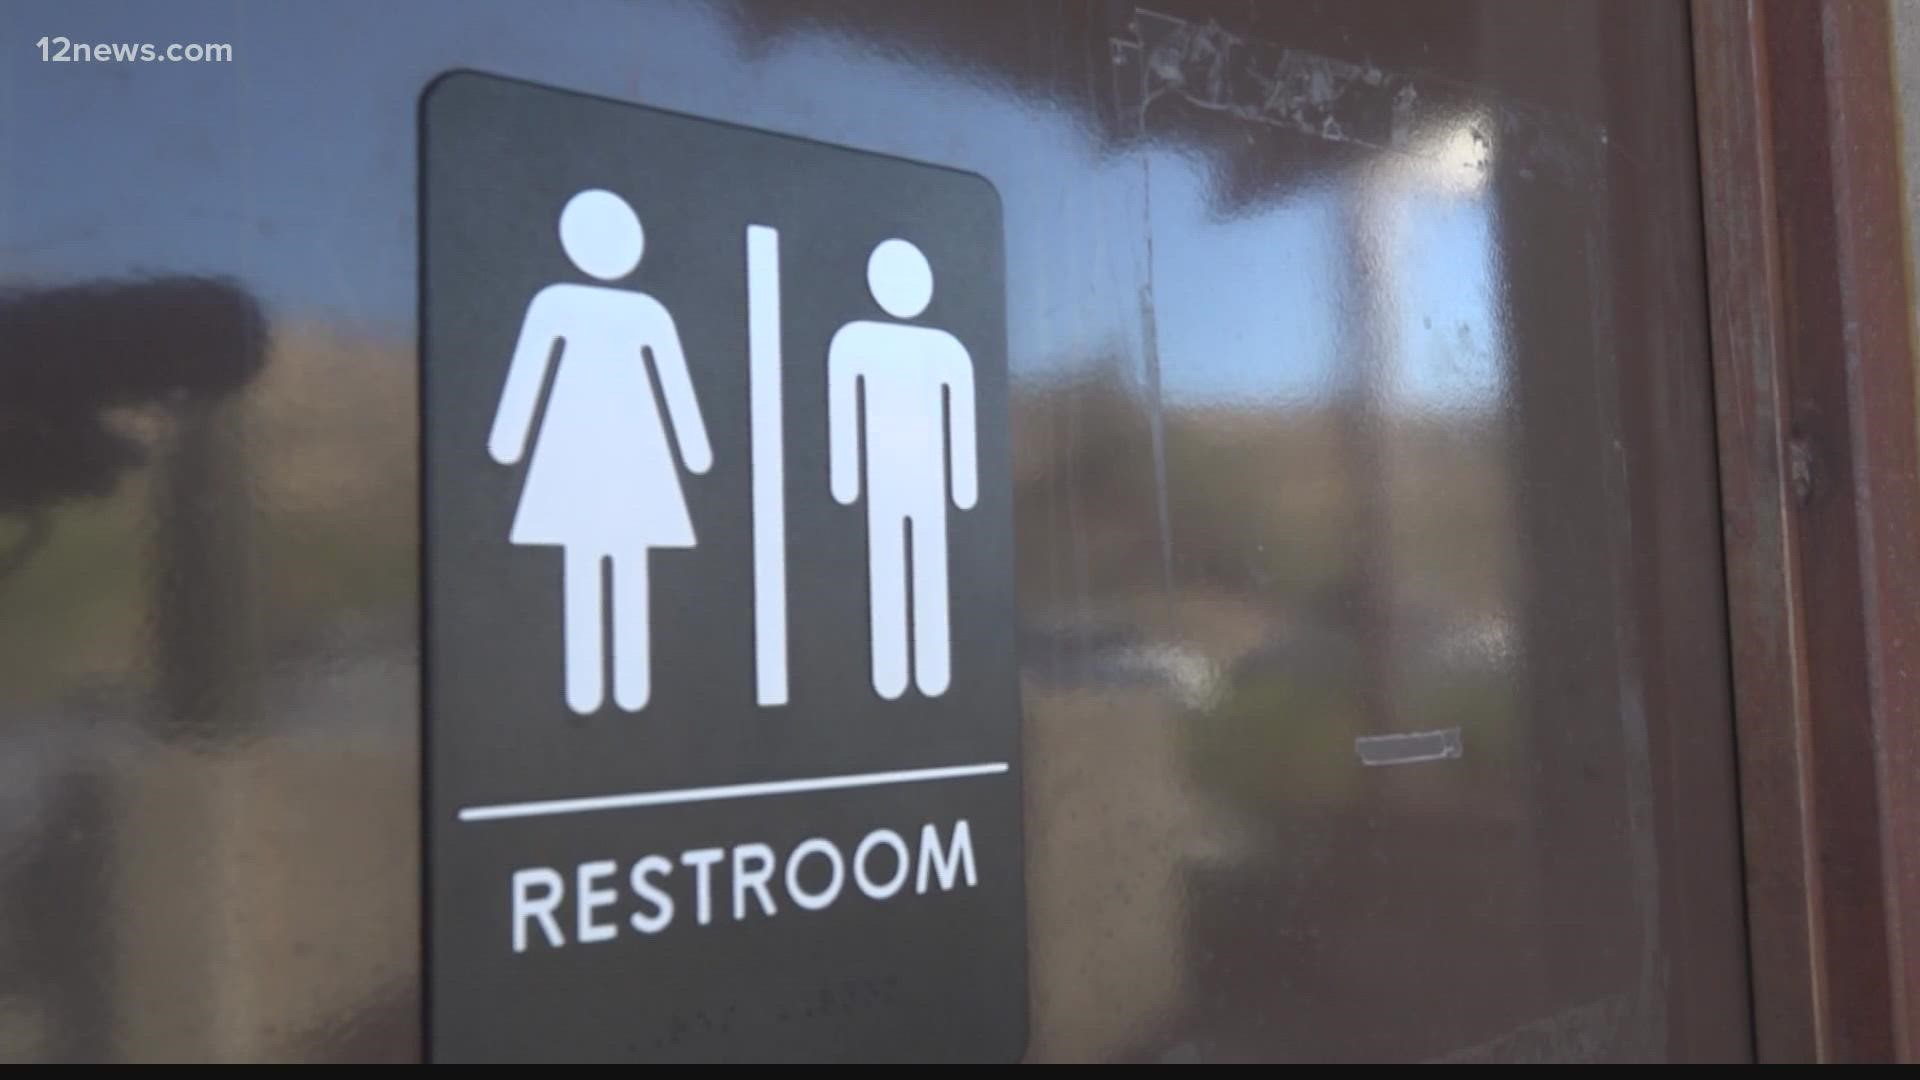 A 27-year-old man was arrested Monday on suspicion of surreptitiously recording videos of women in a Valley bathroom stall, according to the Phoenix police.